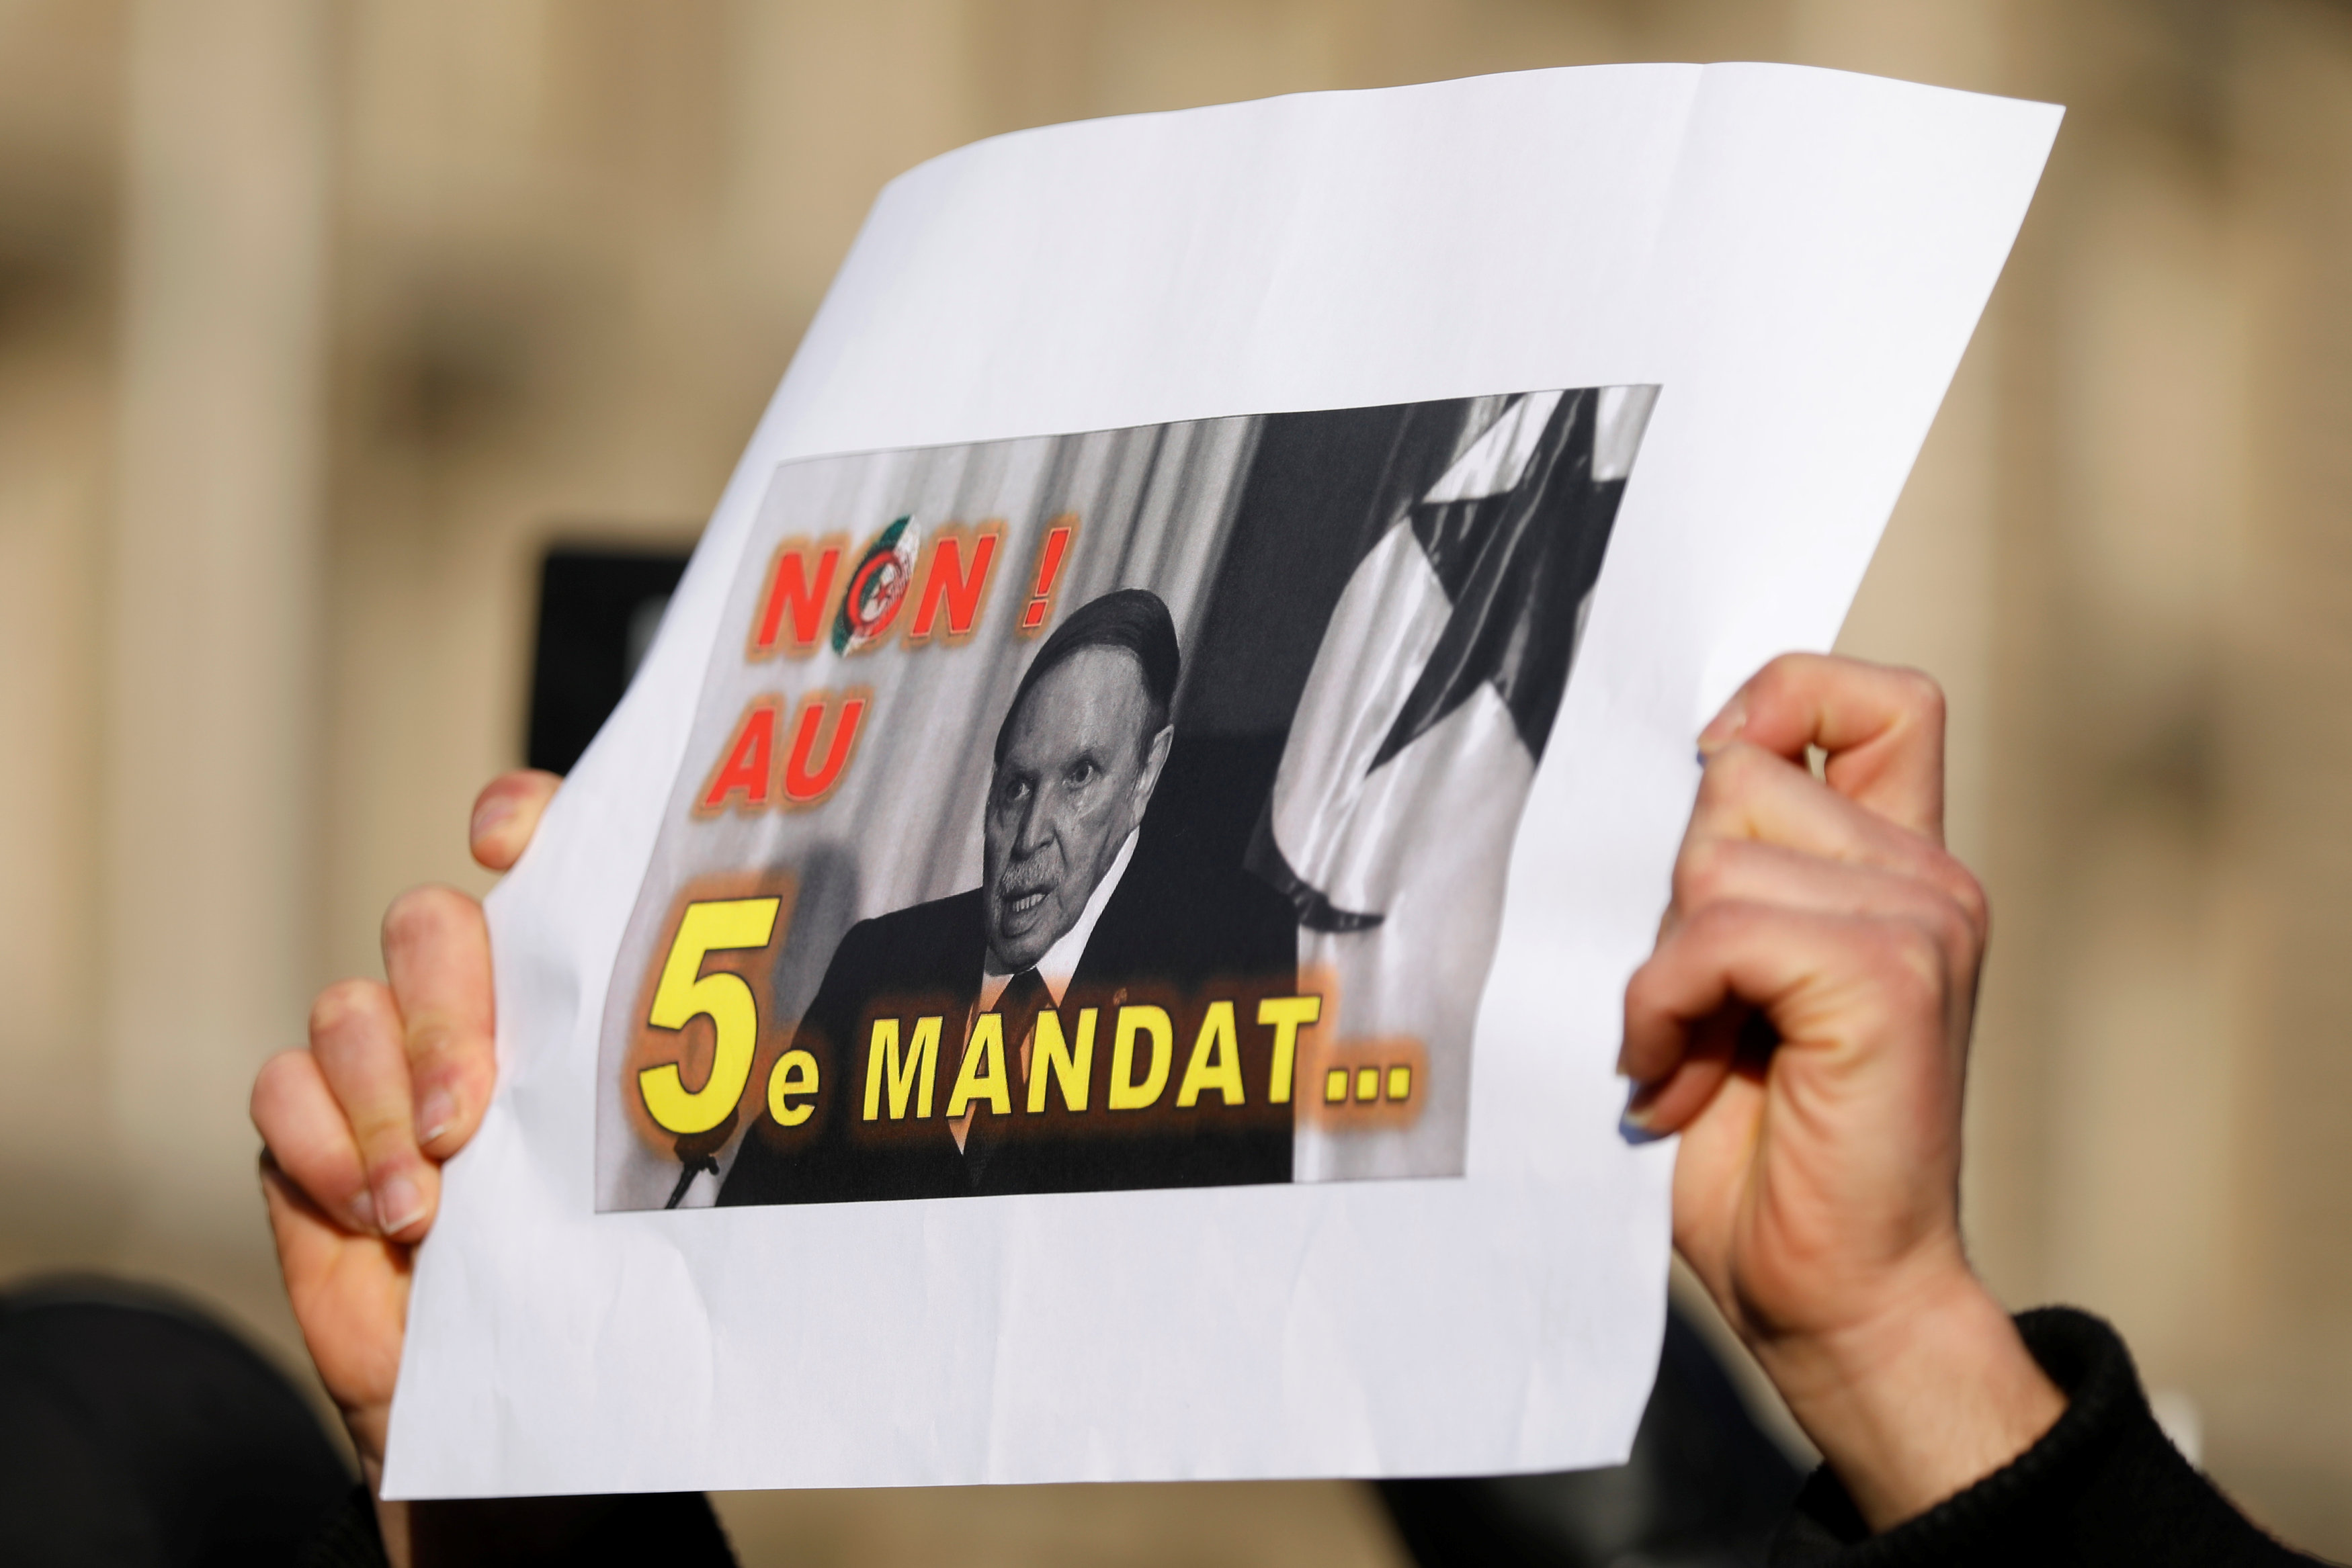 A demonstrator holds up a placard during a protest against President Abdelaziz Bouteflika seeking a fifth term (Reuters)